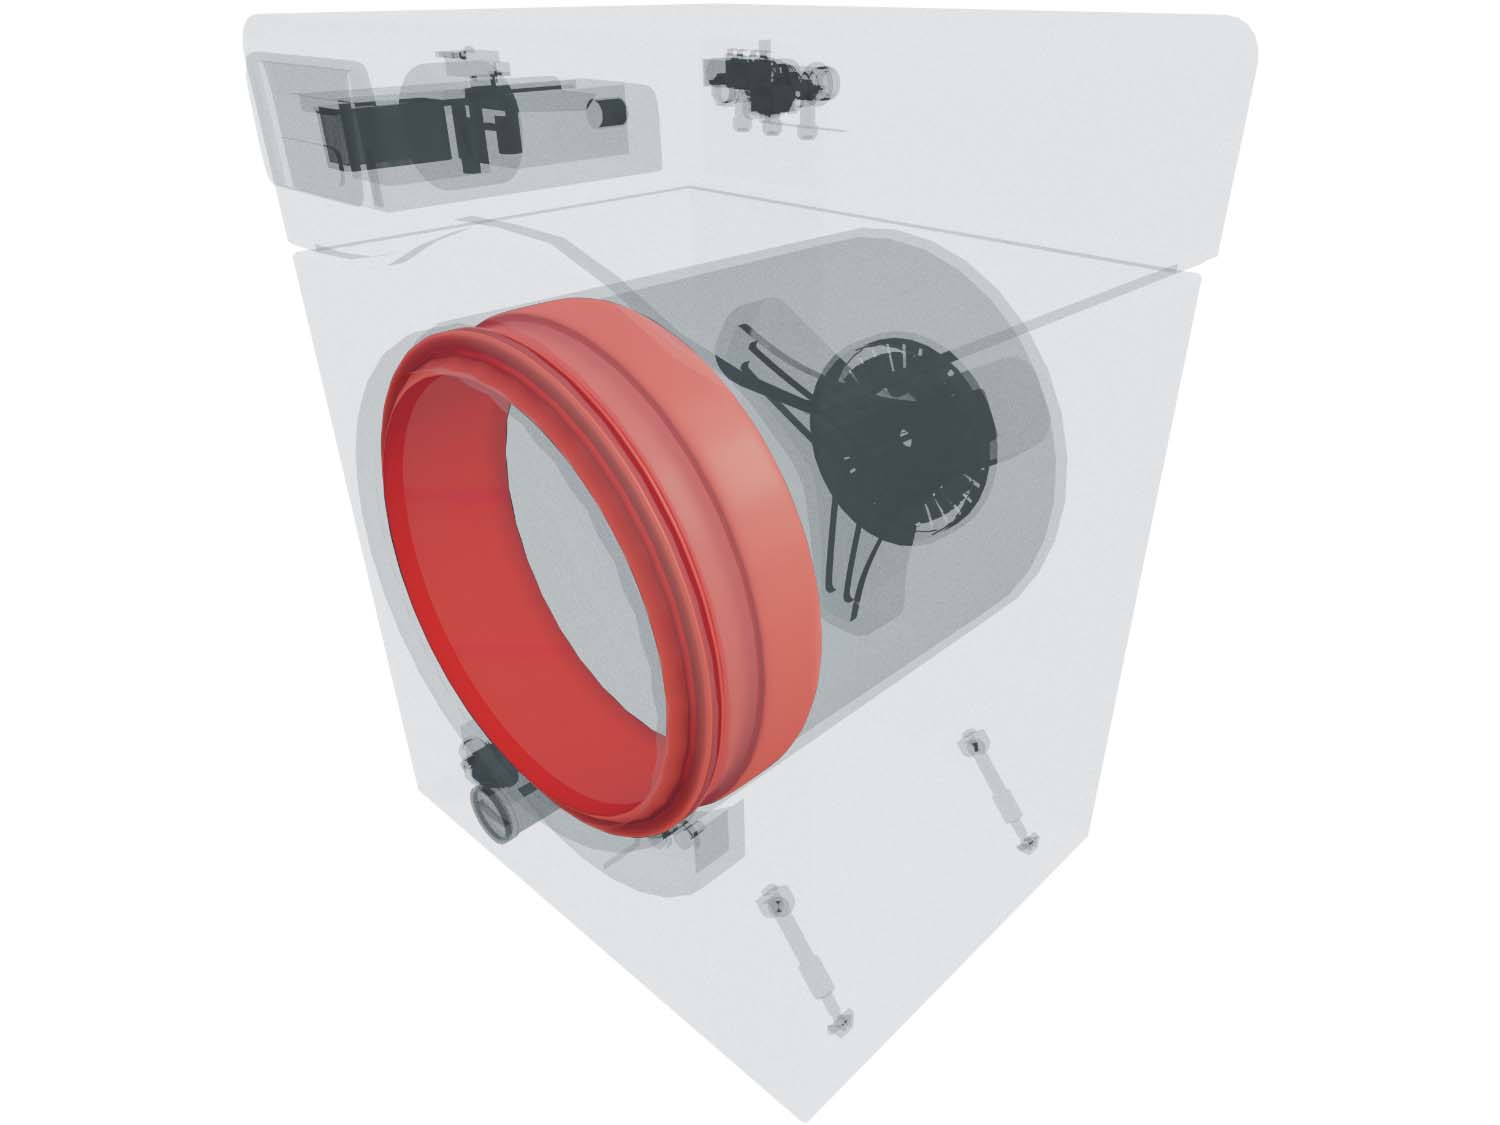 A 3D diagram showing the components of a washer and specifying the location of the door gasket